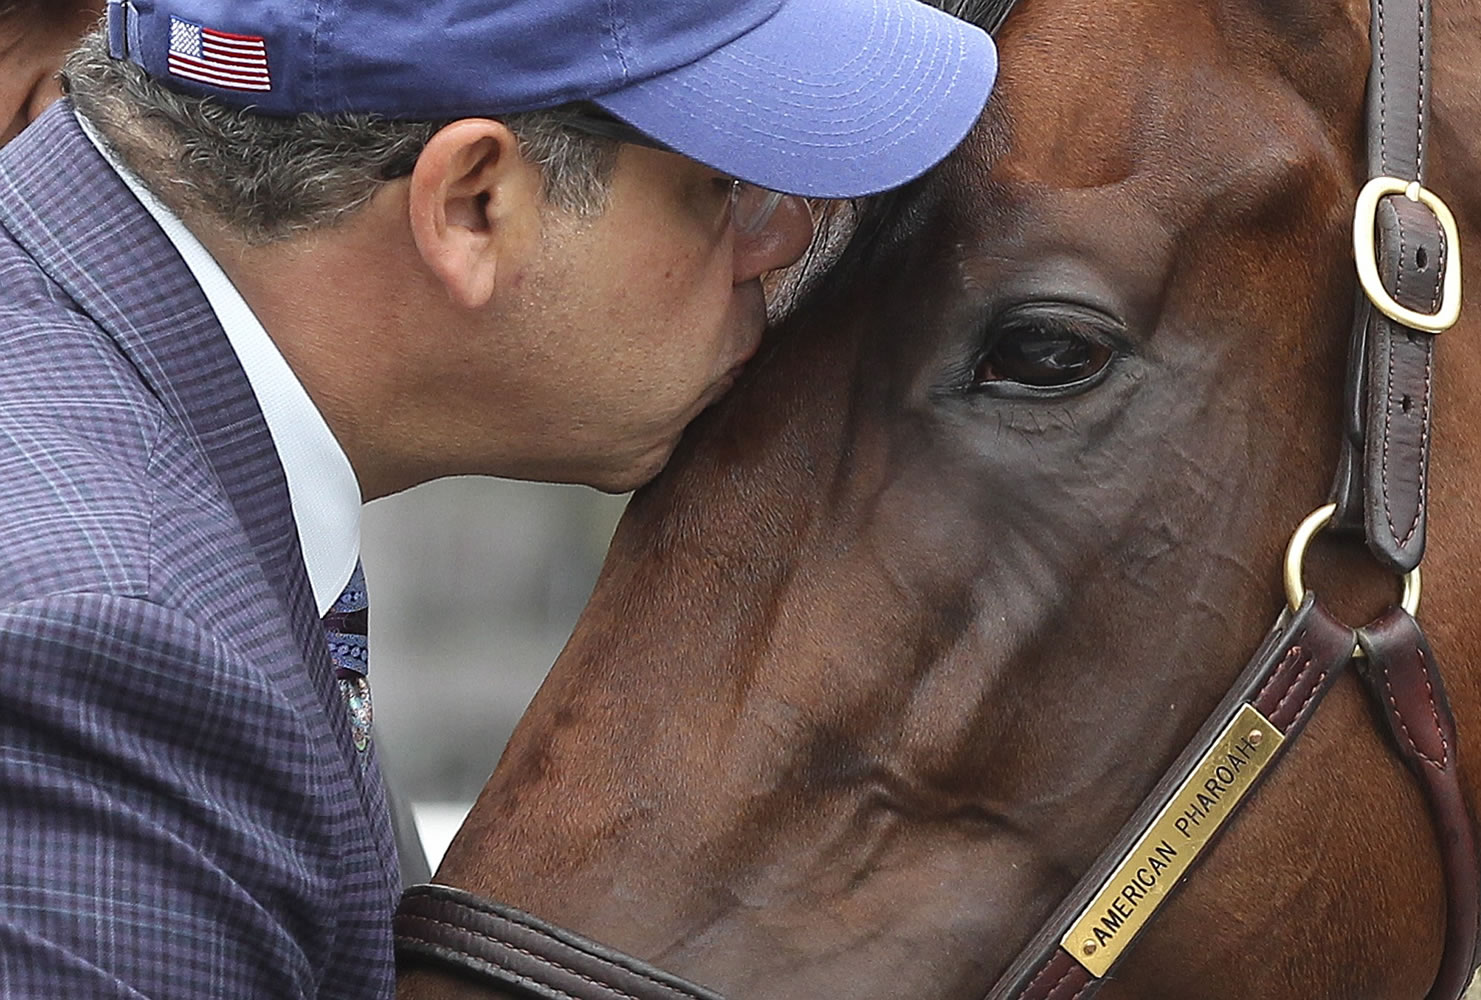 Kentucky Derby and Preakness Stakes winner American Pharoah, gets a kiss from his owner, Ahmed Zayat after a workout at Belmont Park, Friday, June 5, 2015, in Elmont, N.Y. American Pharoah will try for a Triple Crown when he runs in Saturday's 147th running of the Belmont Stakes horse race.